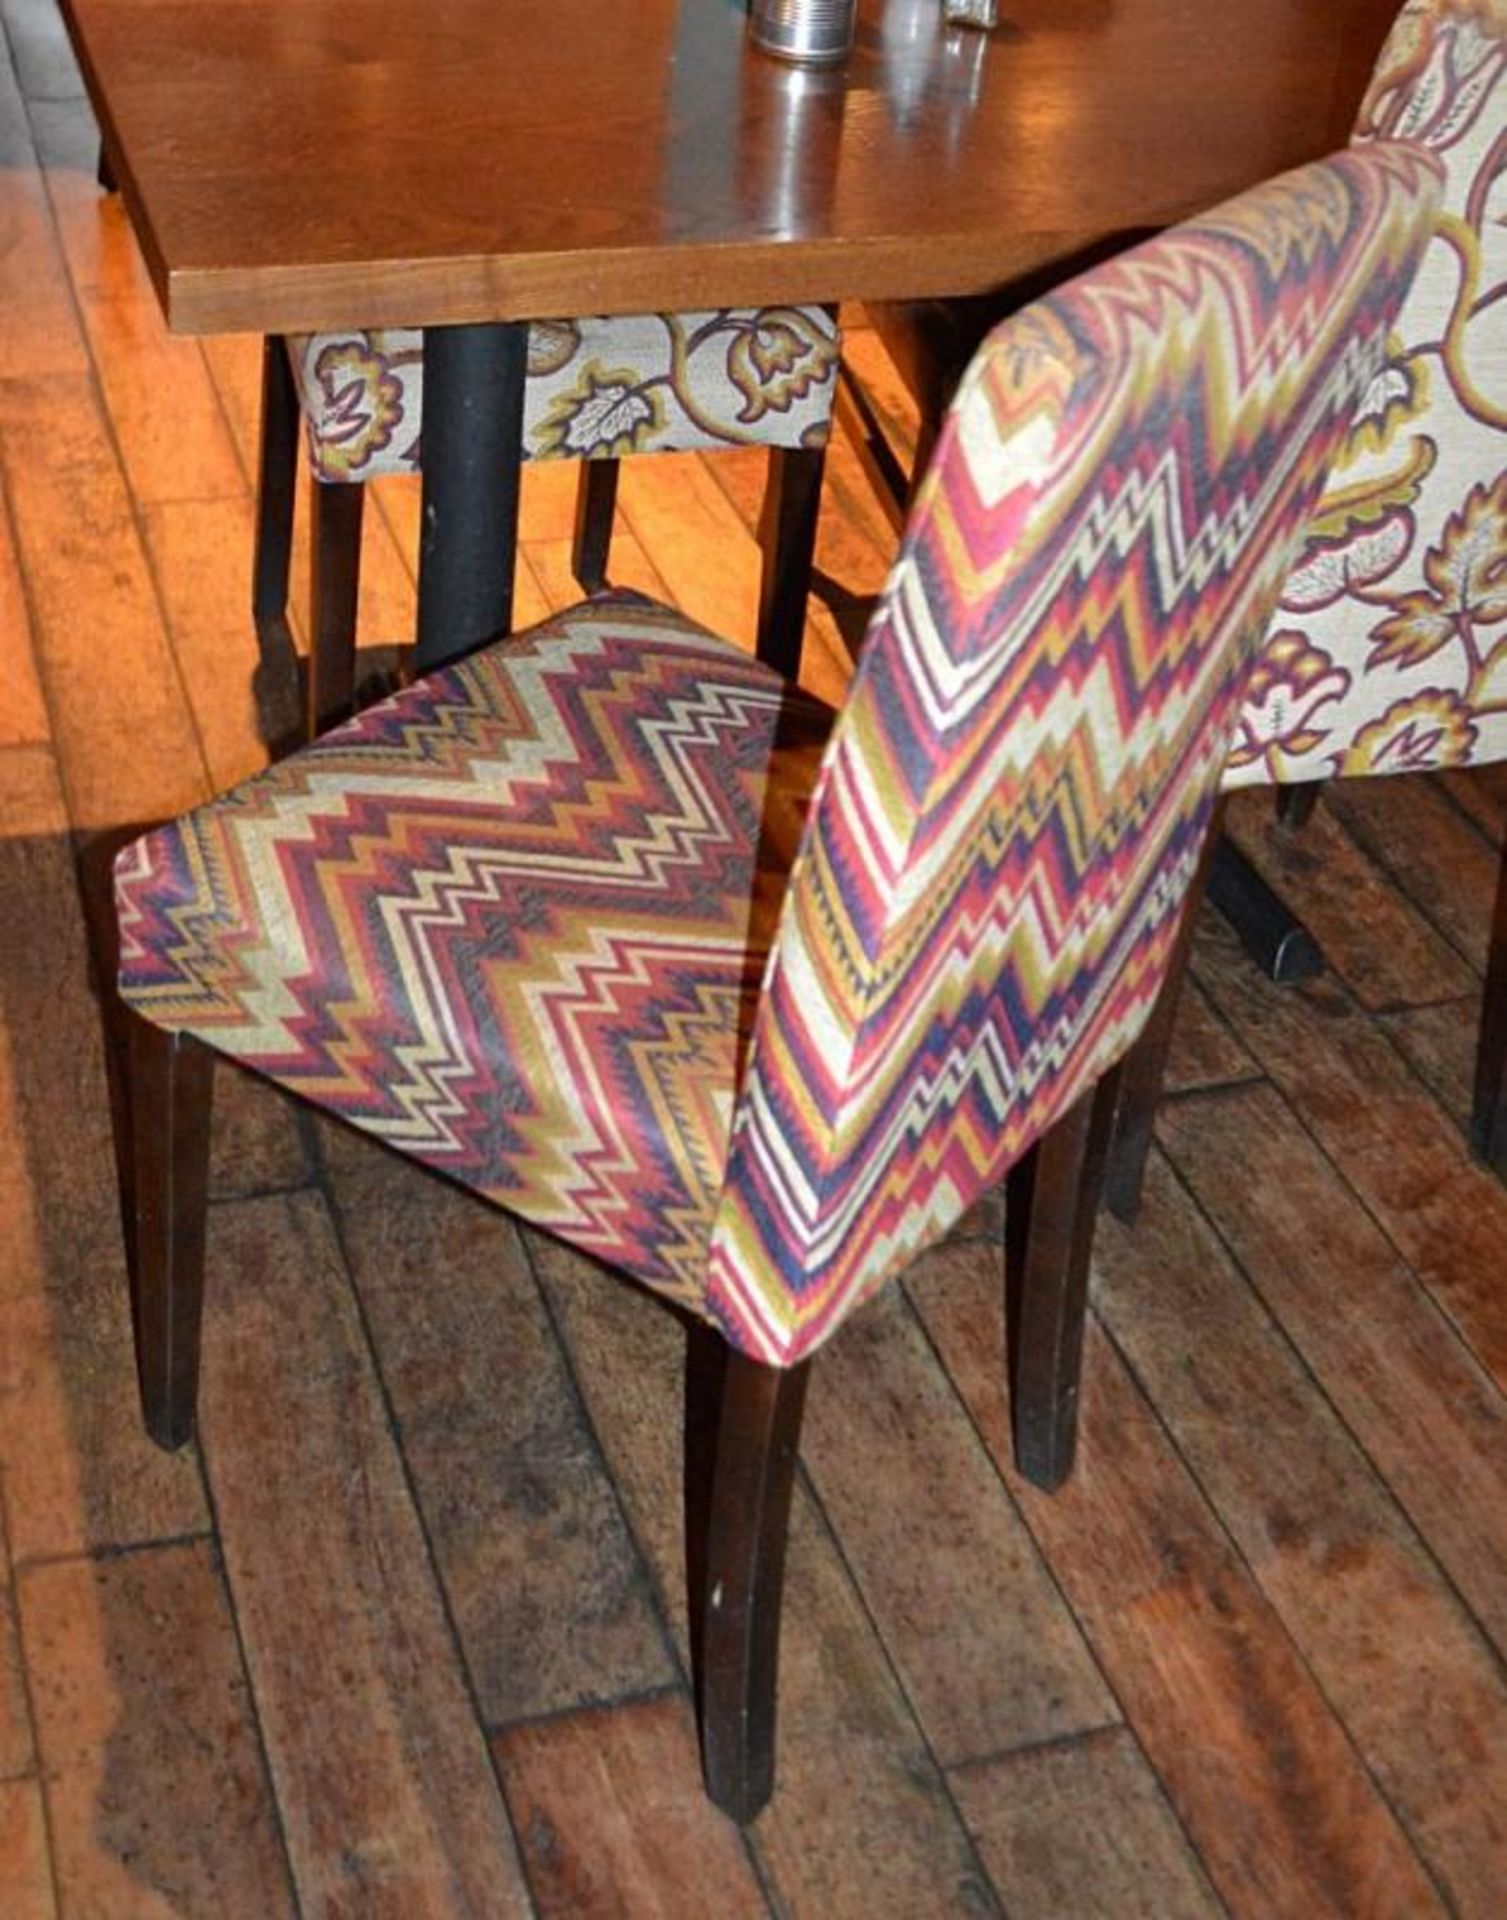 6 x Upholstered Restaurant Dining Chairs In A Zig-Zag Mexican-style Fabric - Dimensions (approx): H9 - Image 2 of 2